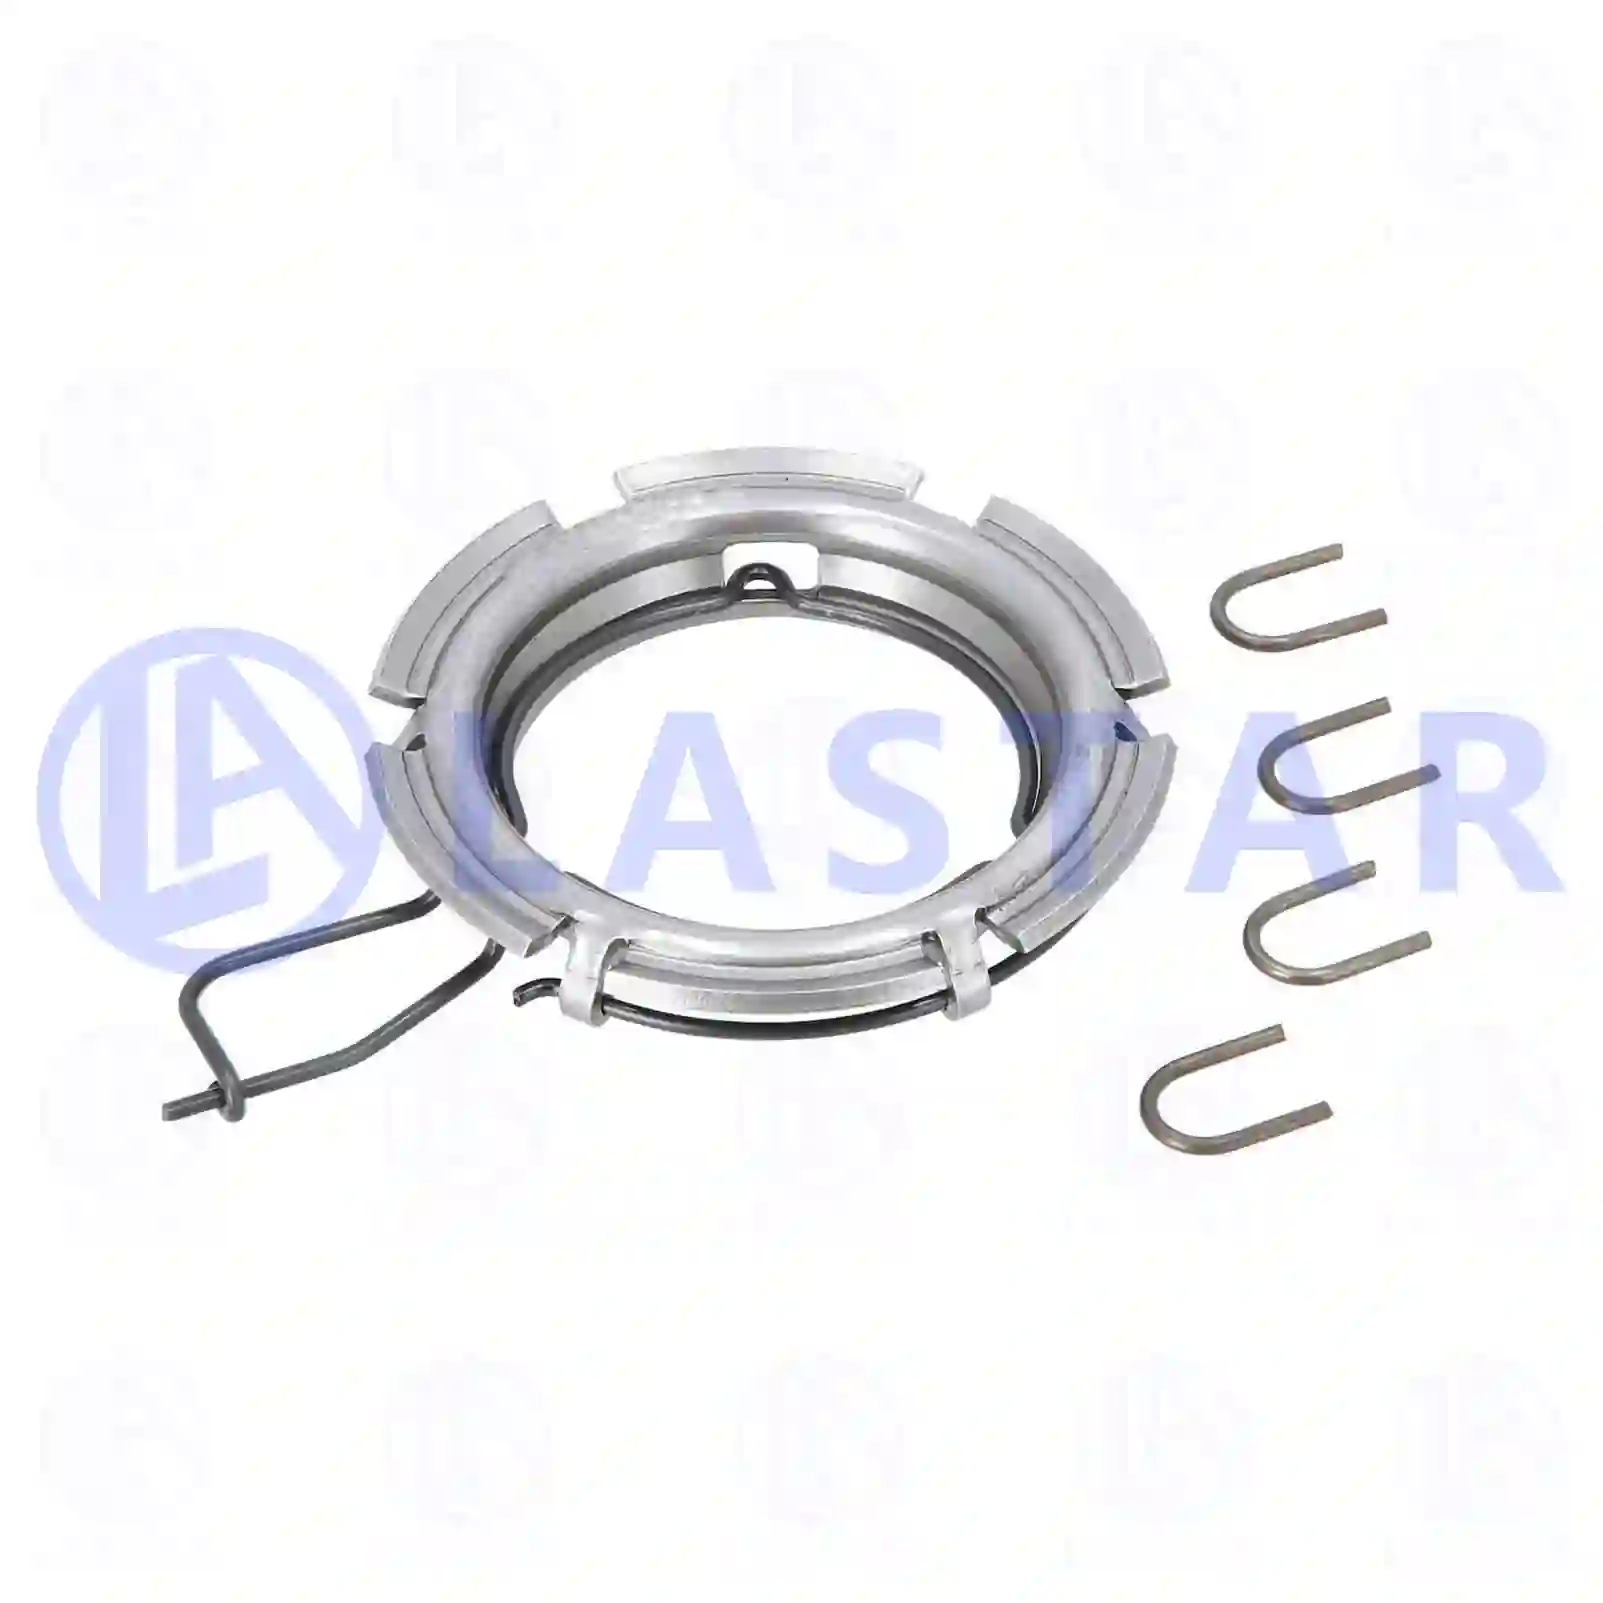  Release ring || Lastar Spare Part | Truck Spare Parts, Auotomotive Spare Parts